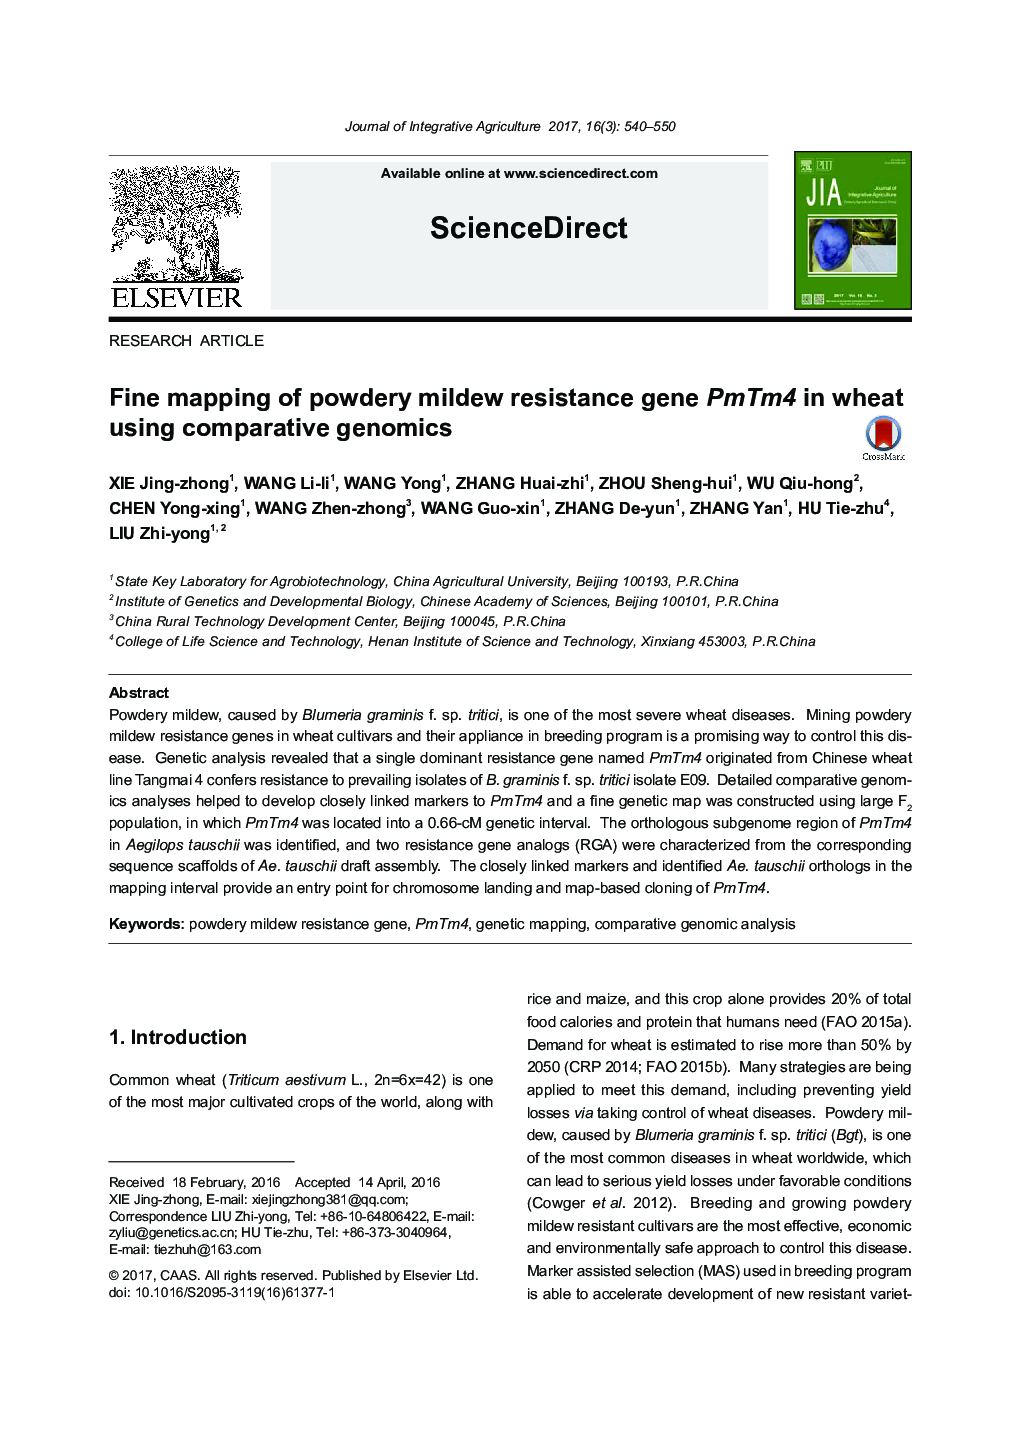 Fine mapping of powdery mildew resistance gene PmTm4 in wheat using comparative genomics